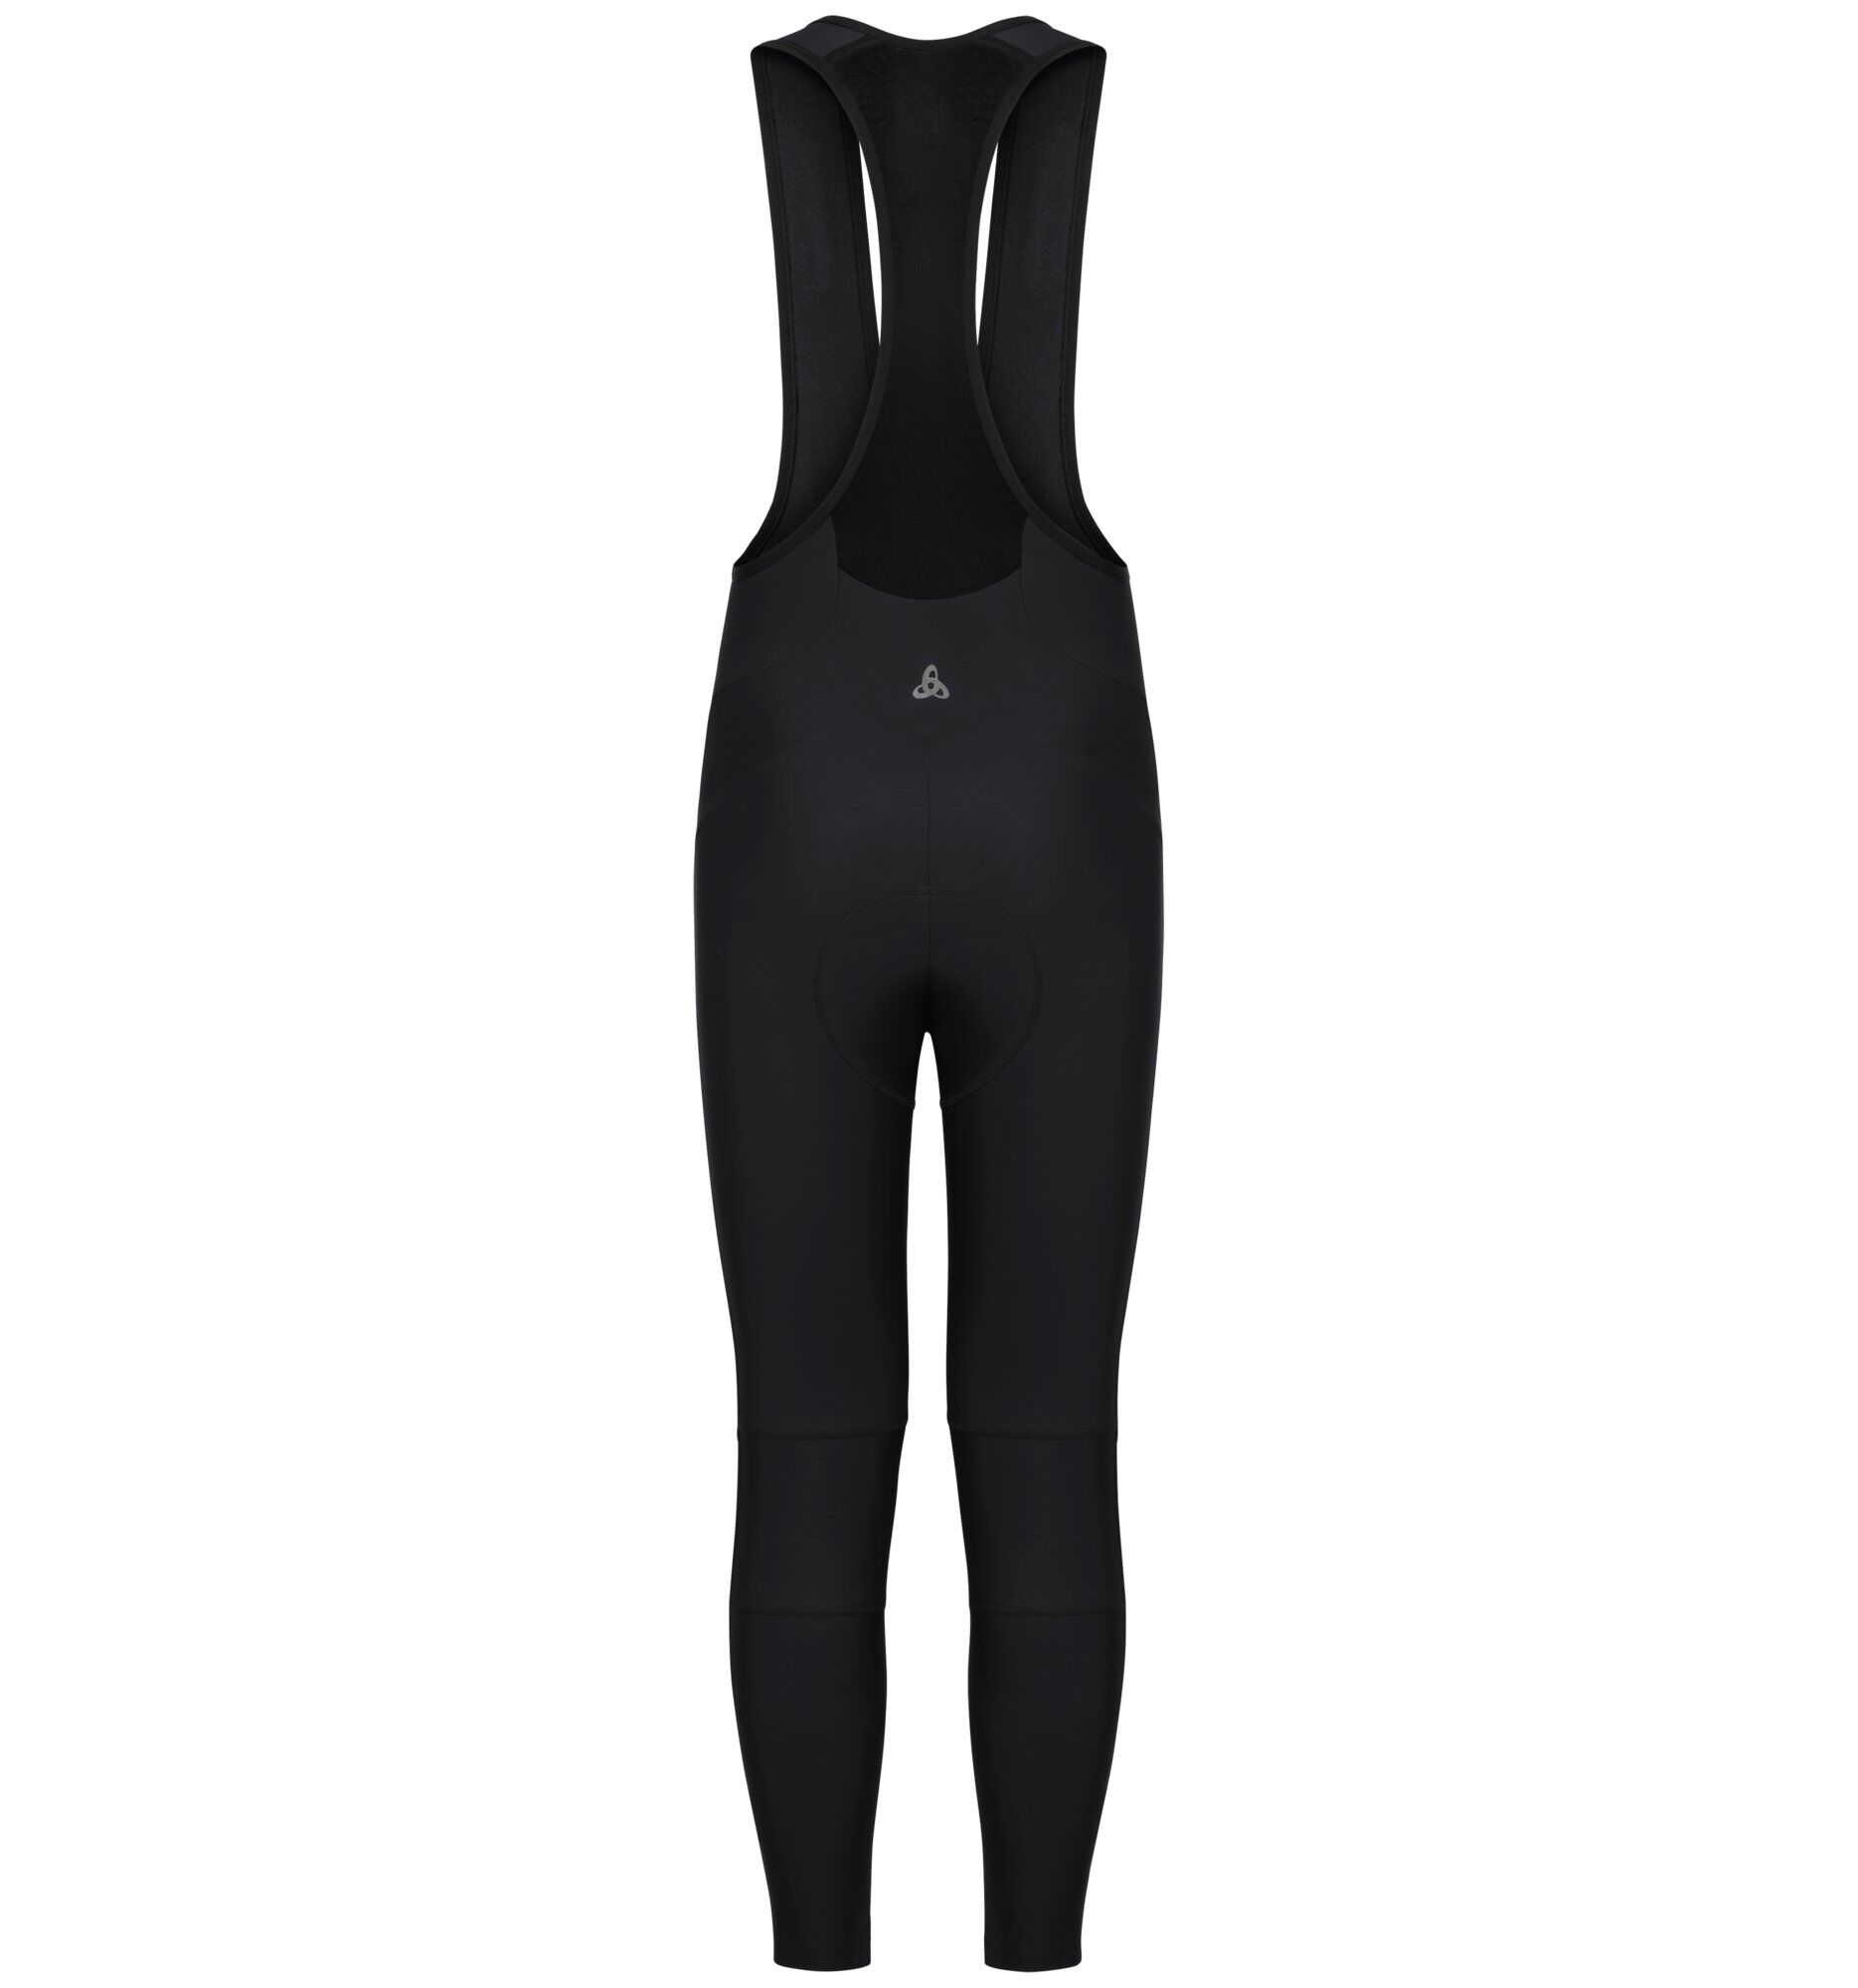 Odlo Breeze Light Tights Suspenders - Cycling tights - Men's